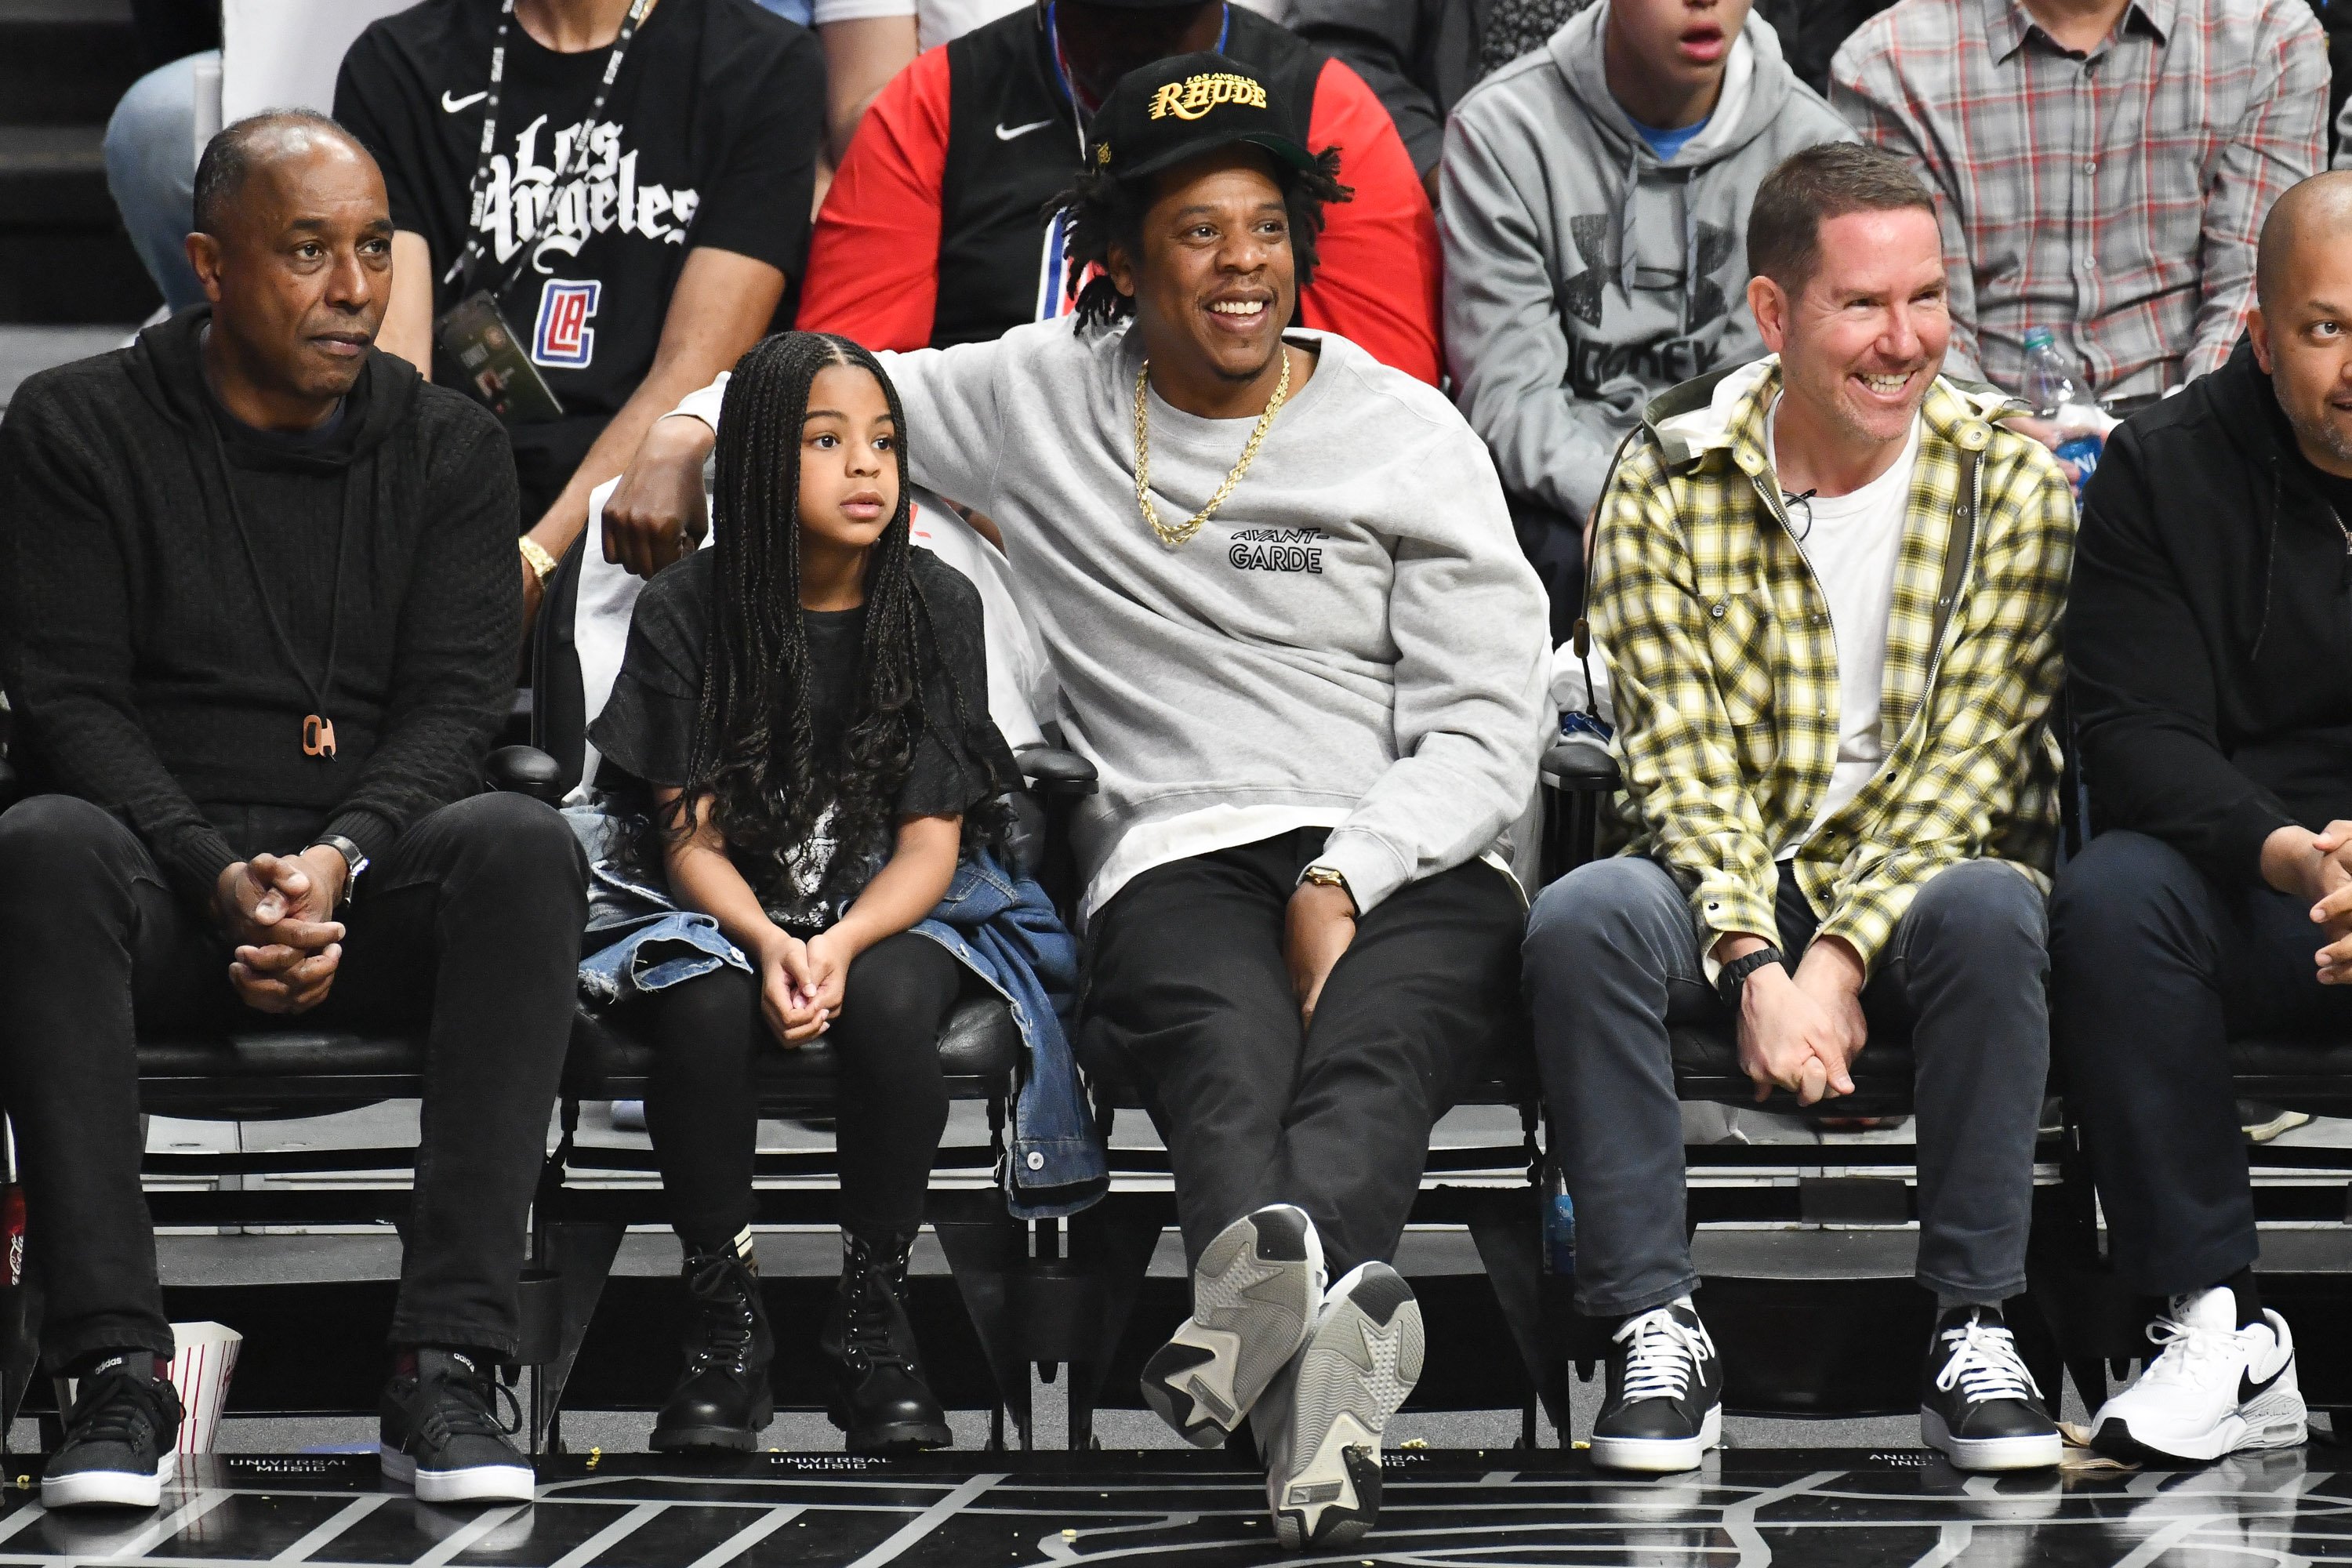 Blue Ivy with her father, Jay-Z watching the game between the Lakers and the Clippers on March 8, 2020 at the Staples Center. | Photo: Getty Images